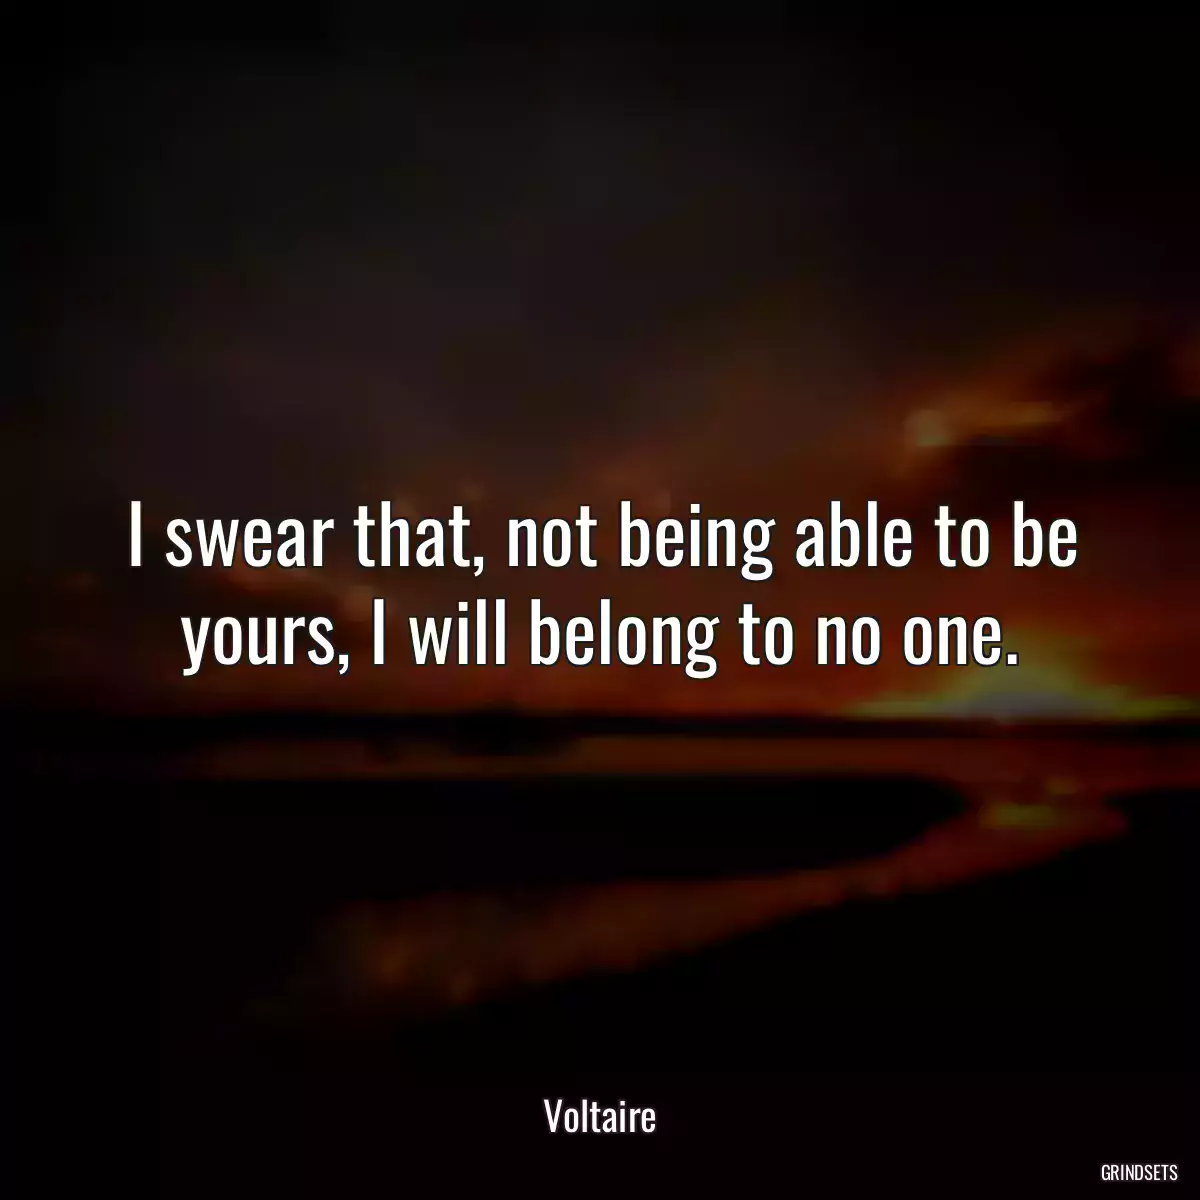 I swear that, not being able to be yours, I will belong to no one.